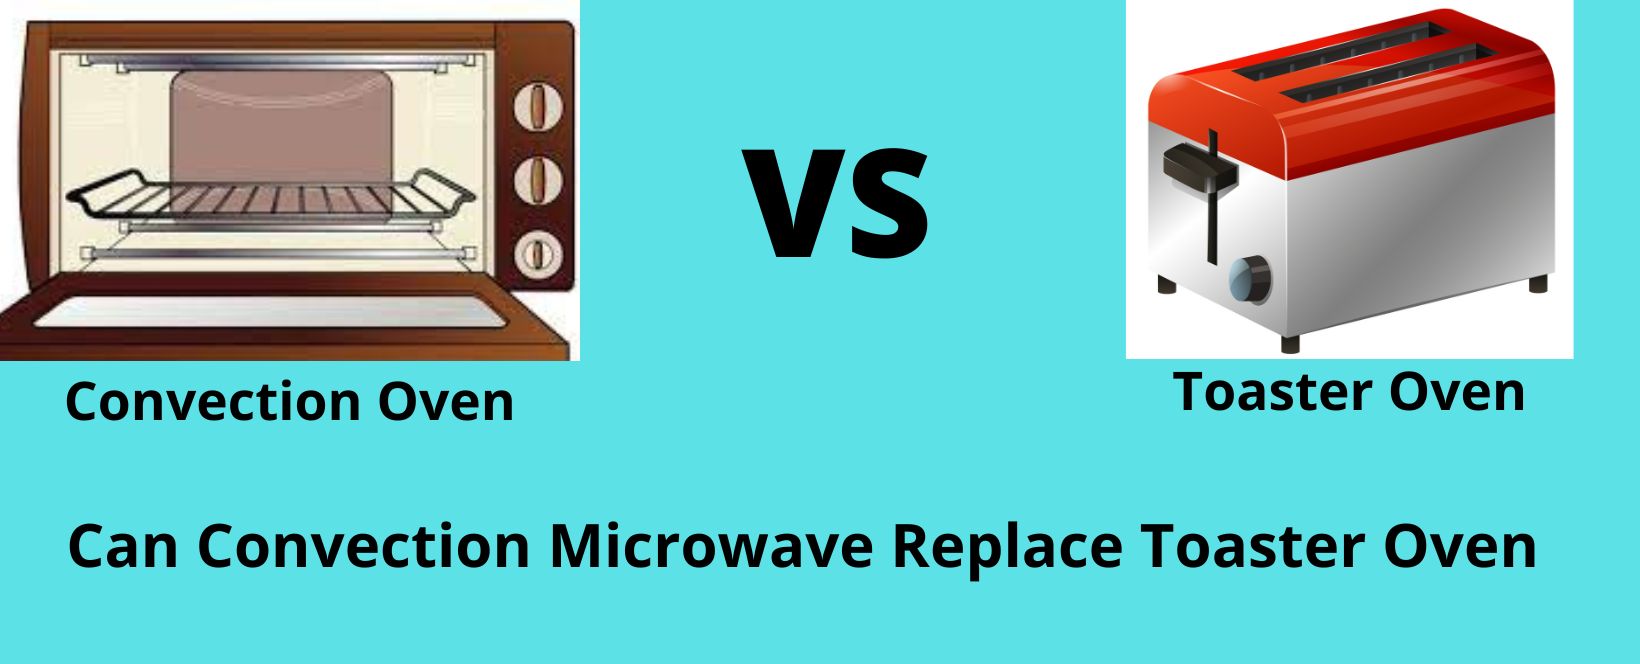 Can Convection Microwave Replace Toaster Oven